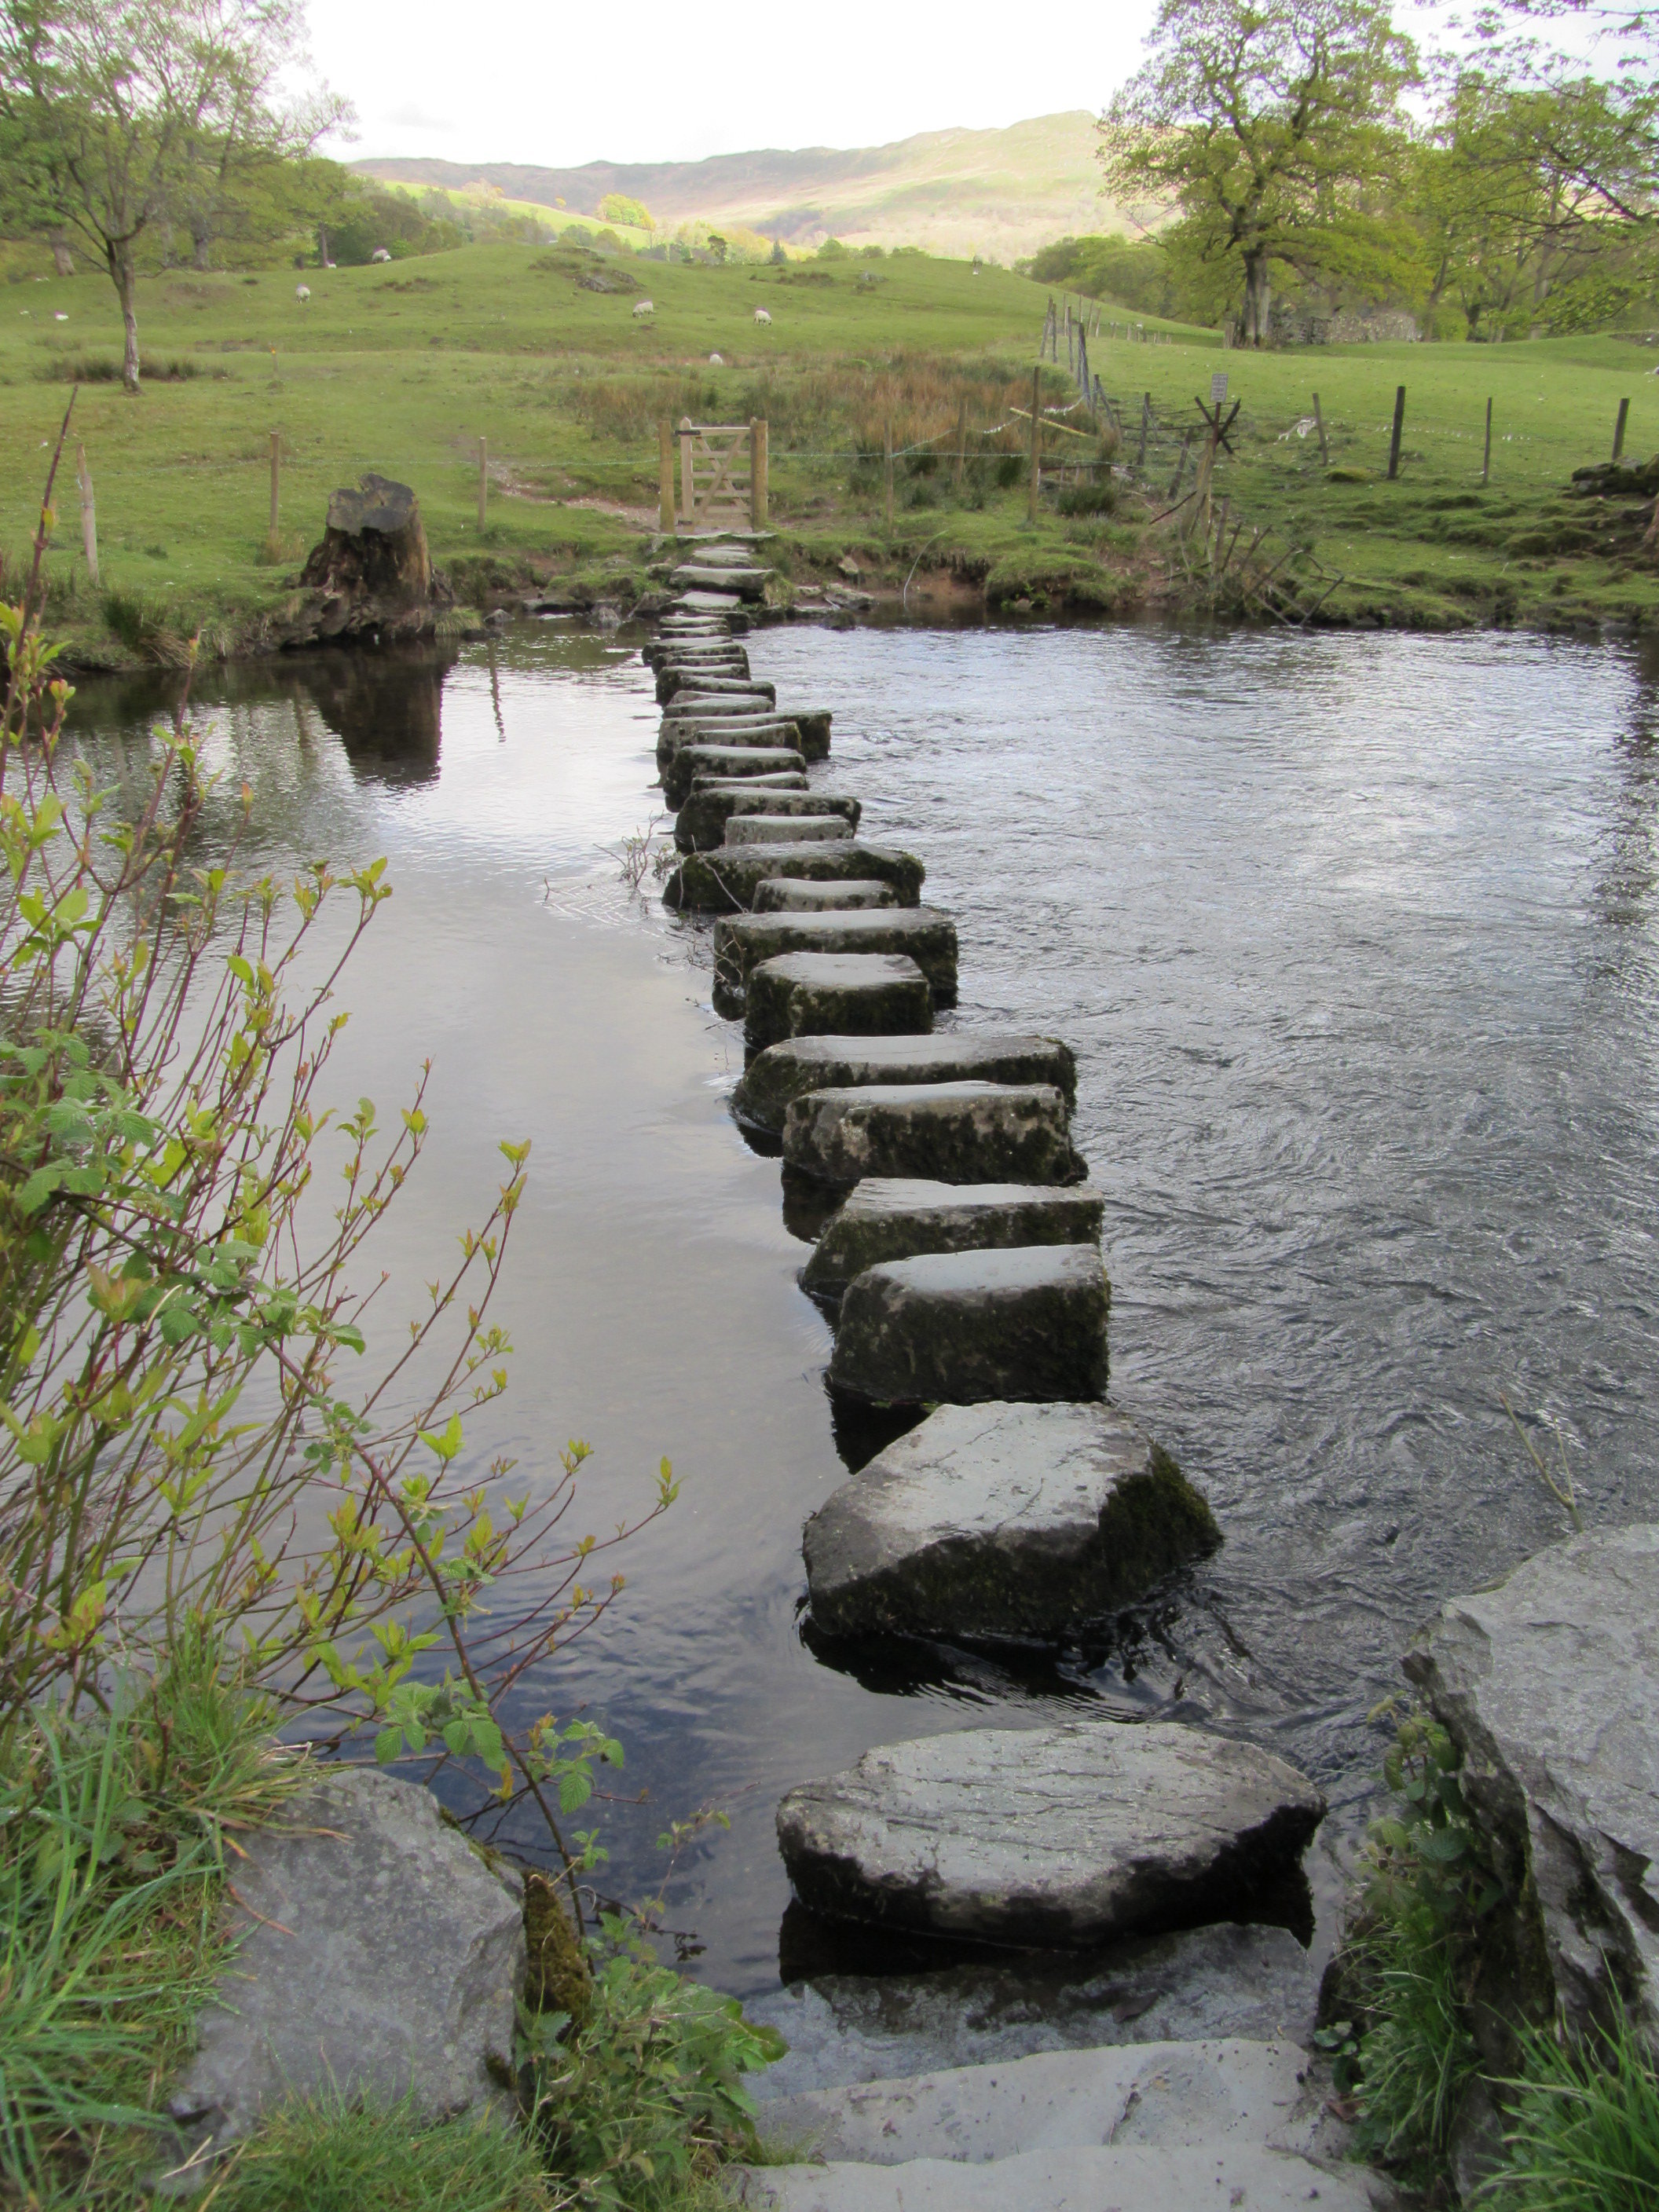 Stepping stones on the river